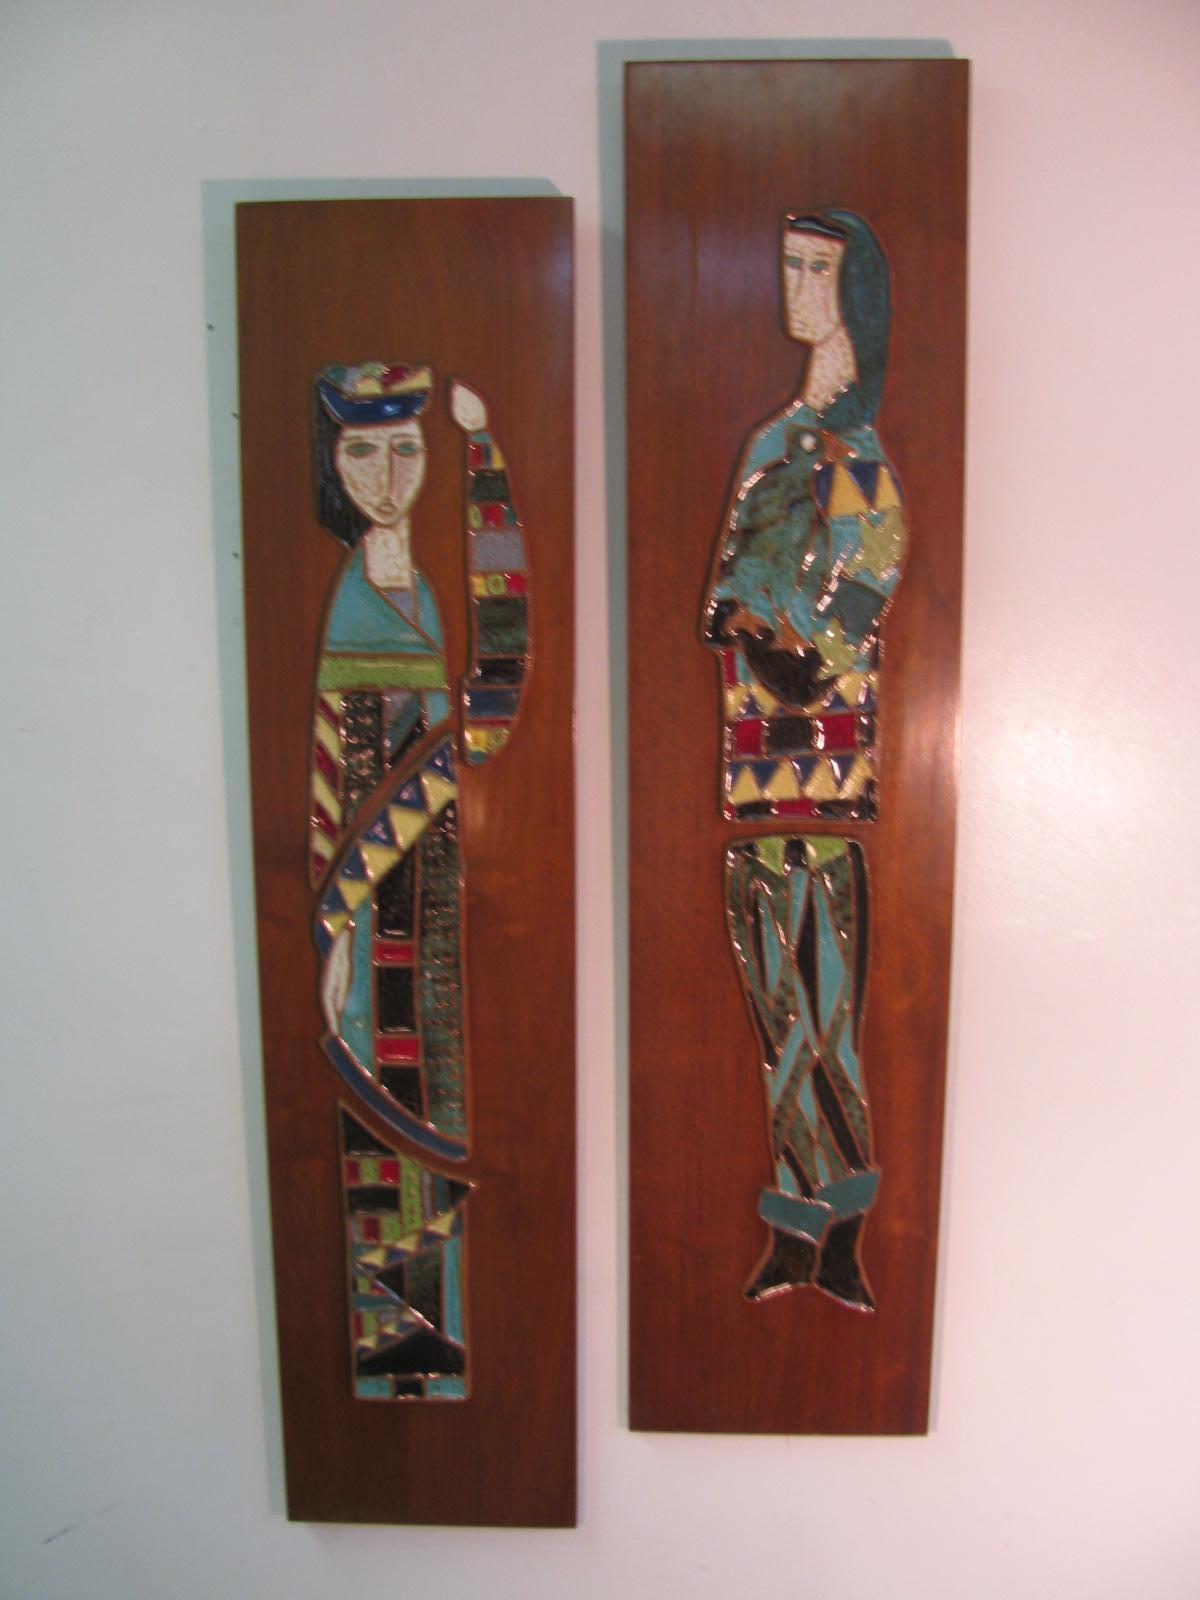 Beautiful pair of art tile plaques by Harris Strong. Two multicolored figures, king and queen, outfitted in harlequin dress. Mounted on walnut panels create a striking balance that would enhance all midcentury homes. Like the day the were created,